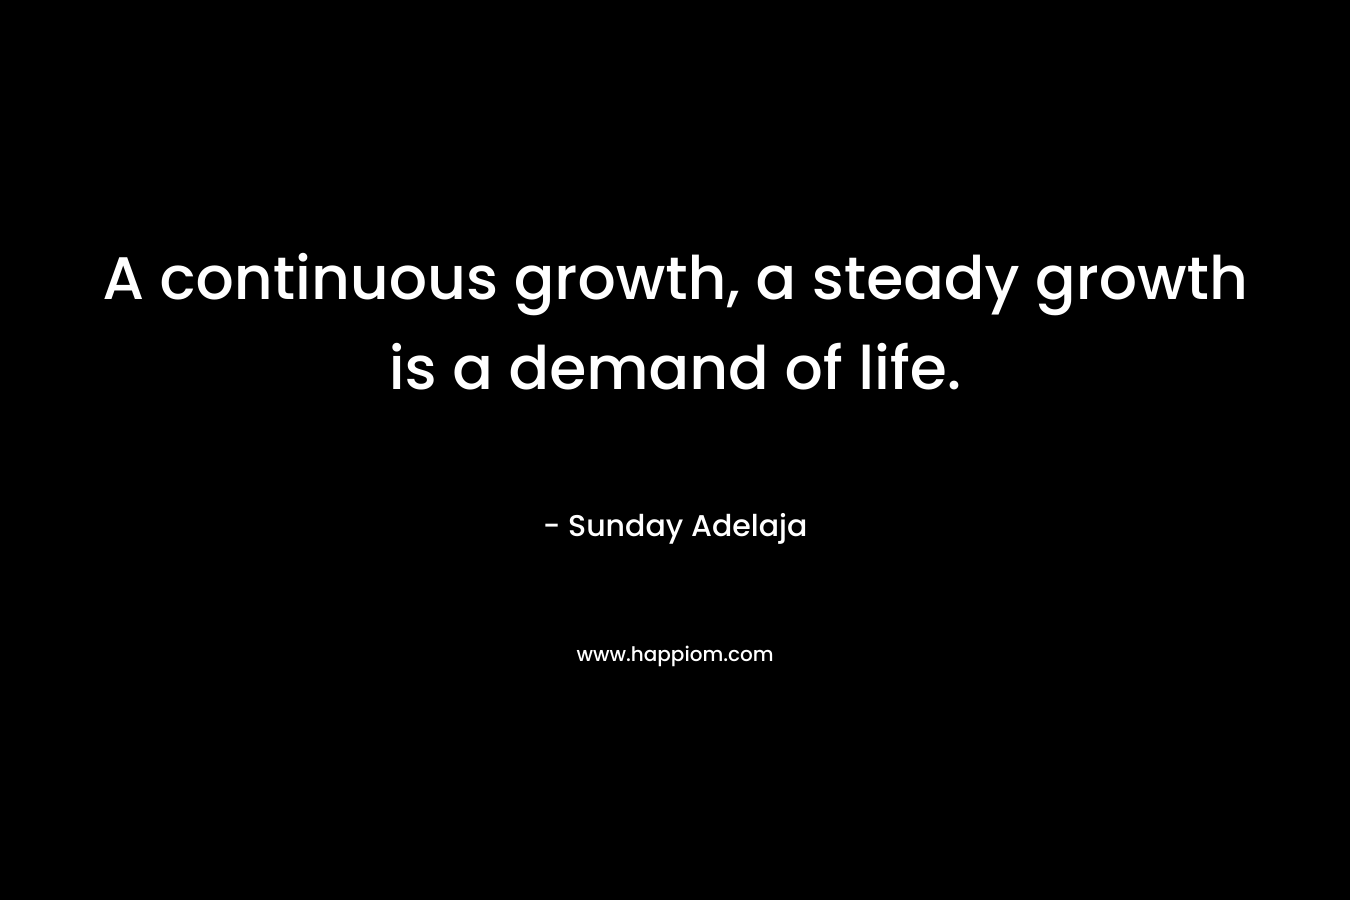 A continuous growth, a steady growth is a demand of life.